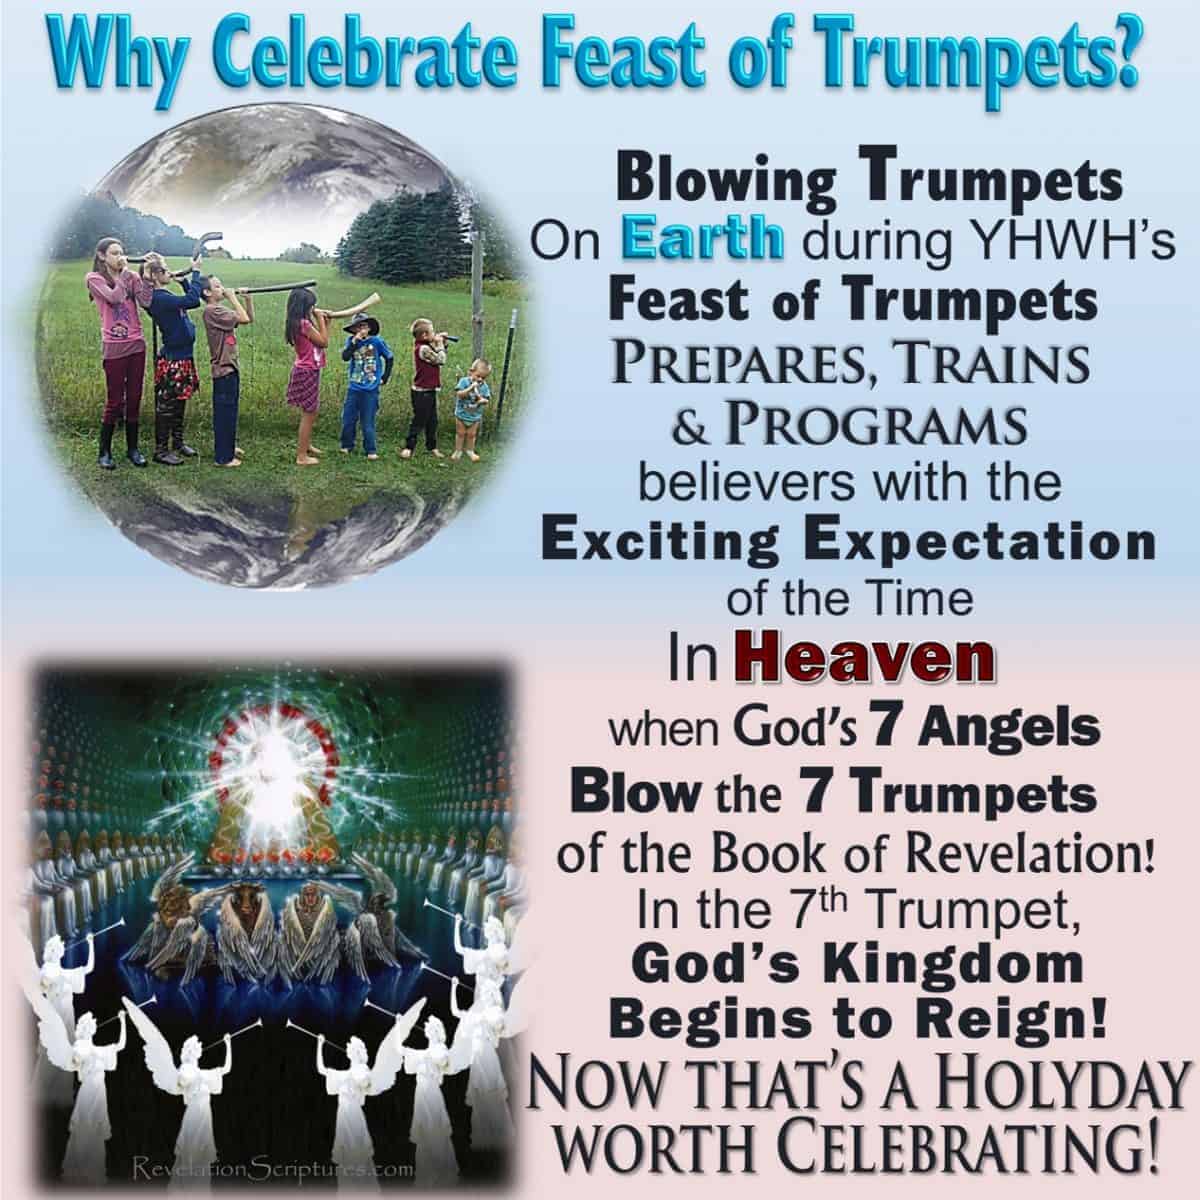 Feast of Trumpets